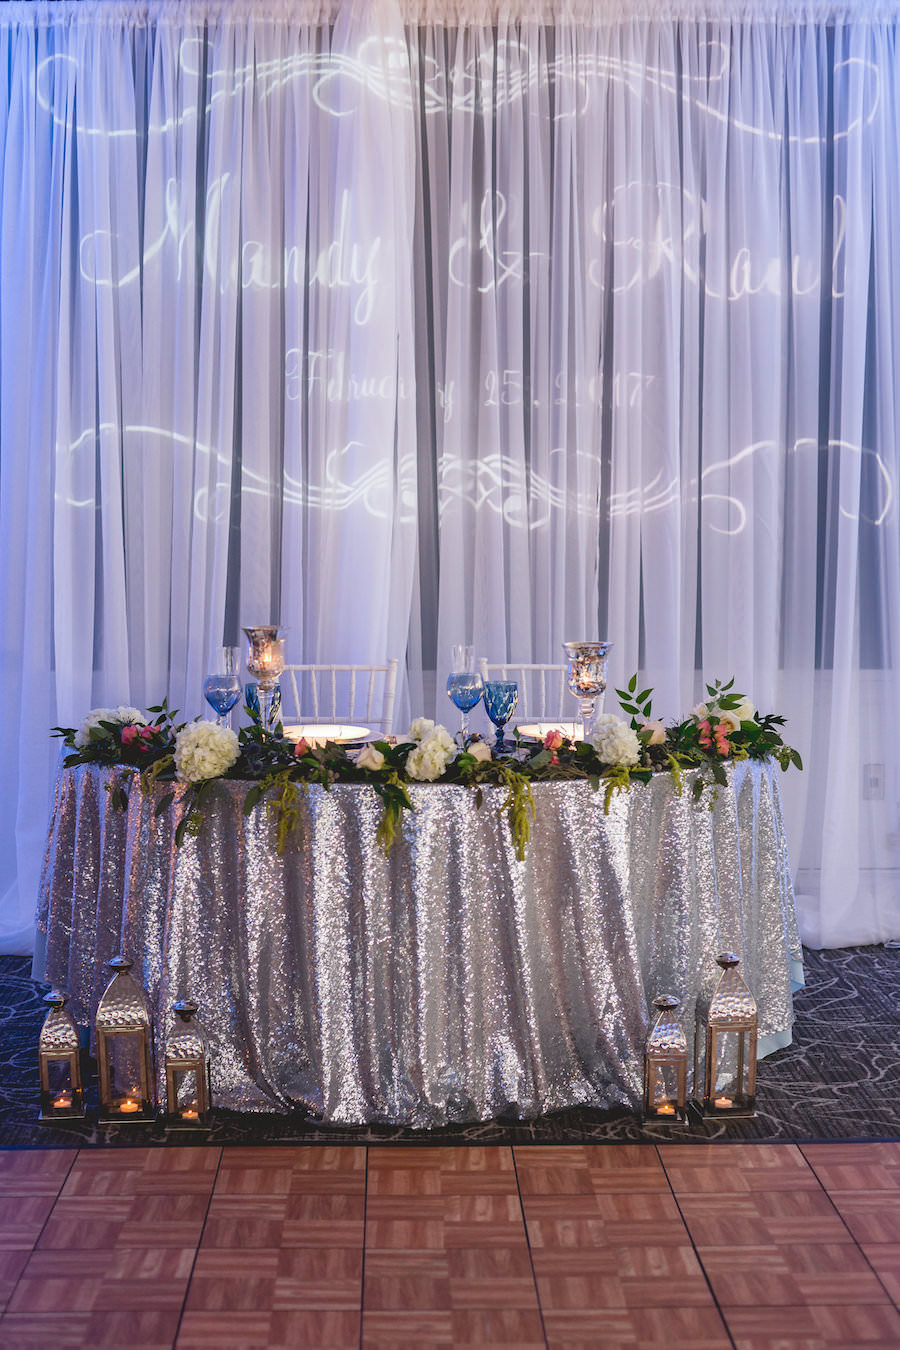 Silver, White and Blue Wedding Reception Decor with Sweetheart Table | Tampa Bay Wedding Venue | Bay Harbor Hotel